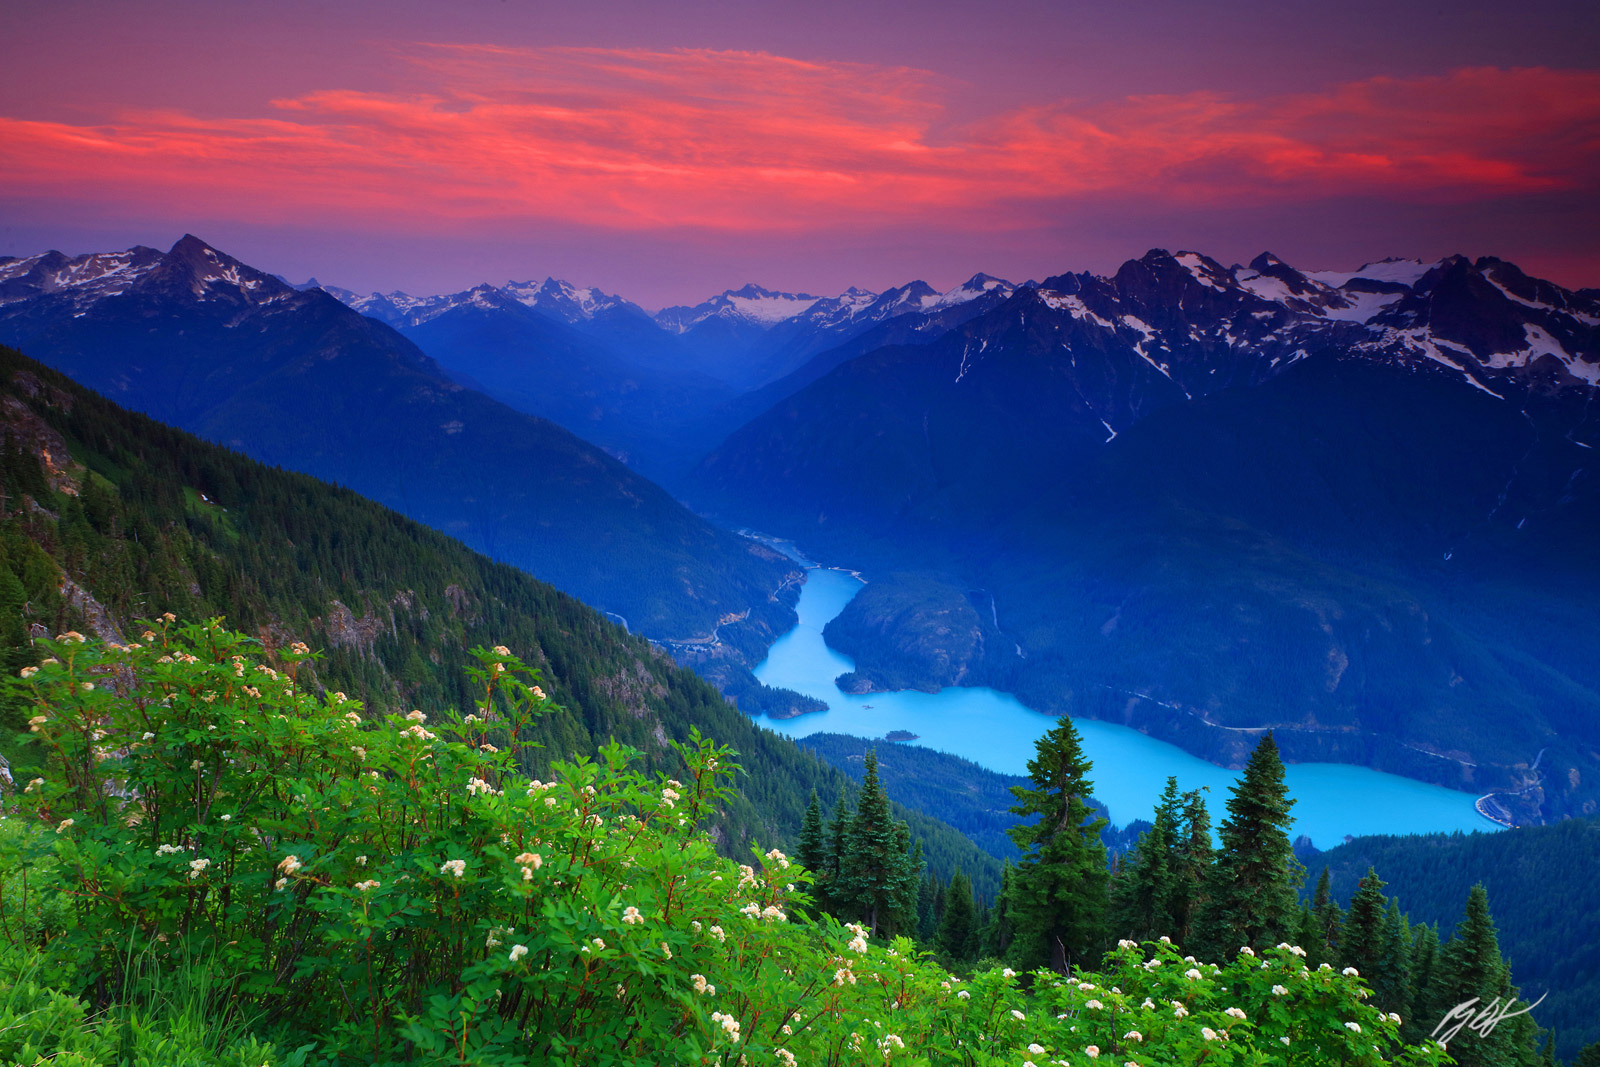 Sunset over Diablo Lake from the Summit of Sourdough Mountain in North Cascades National Park in Washington